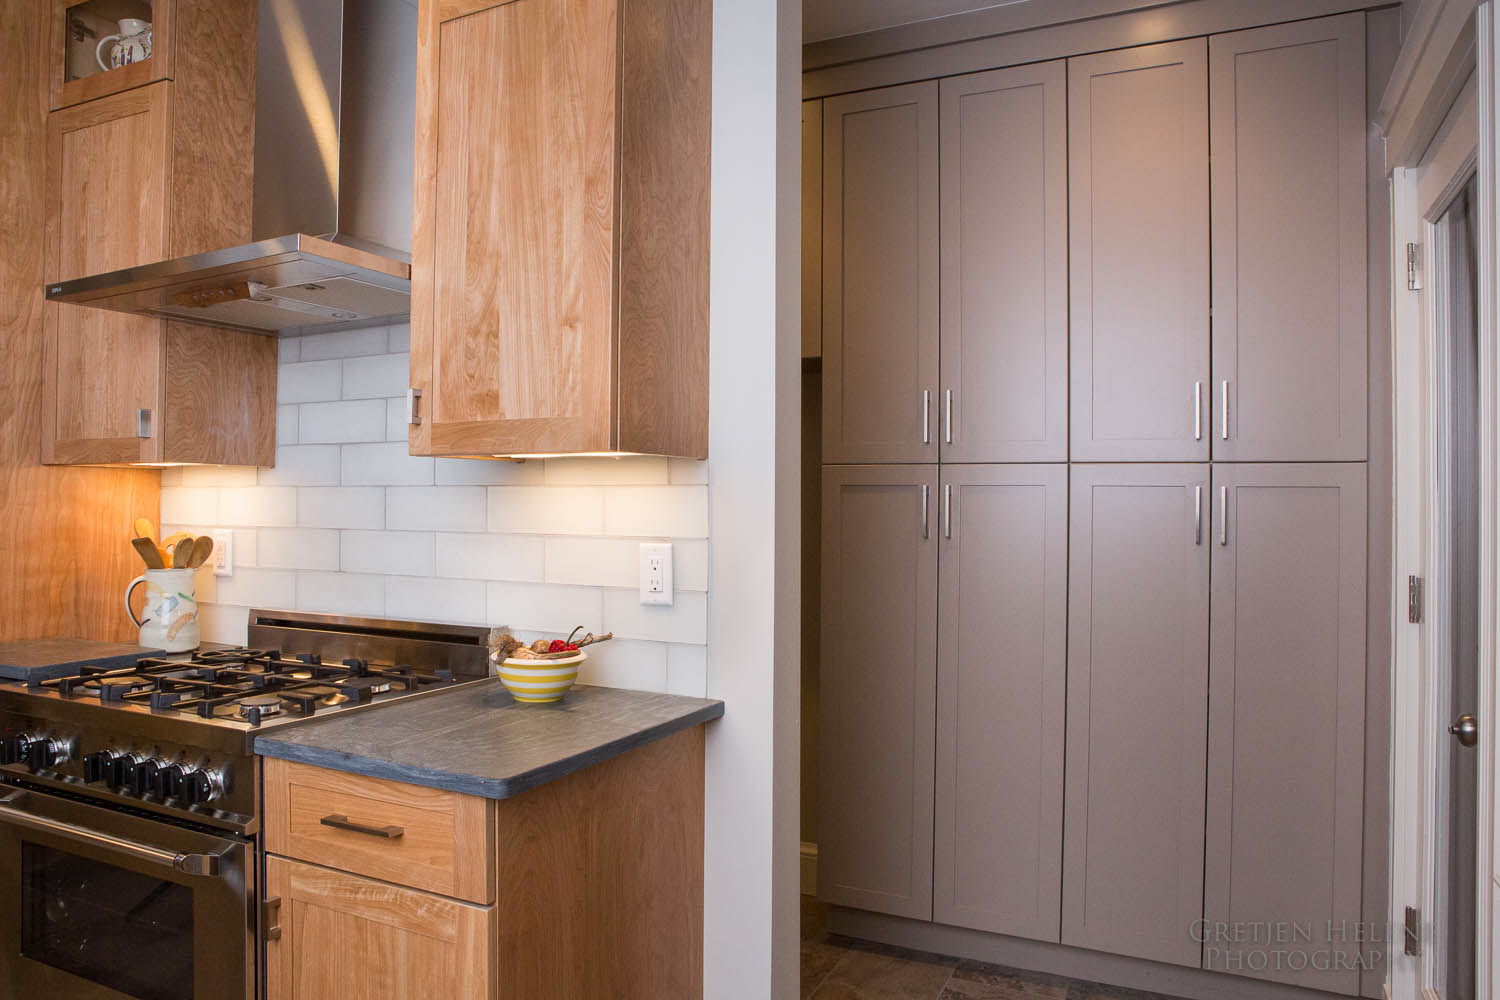 Kitchens from Boston Building Resources - Boston Building Resources